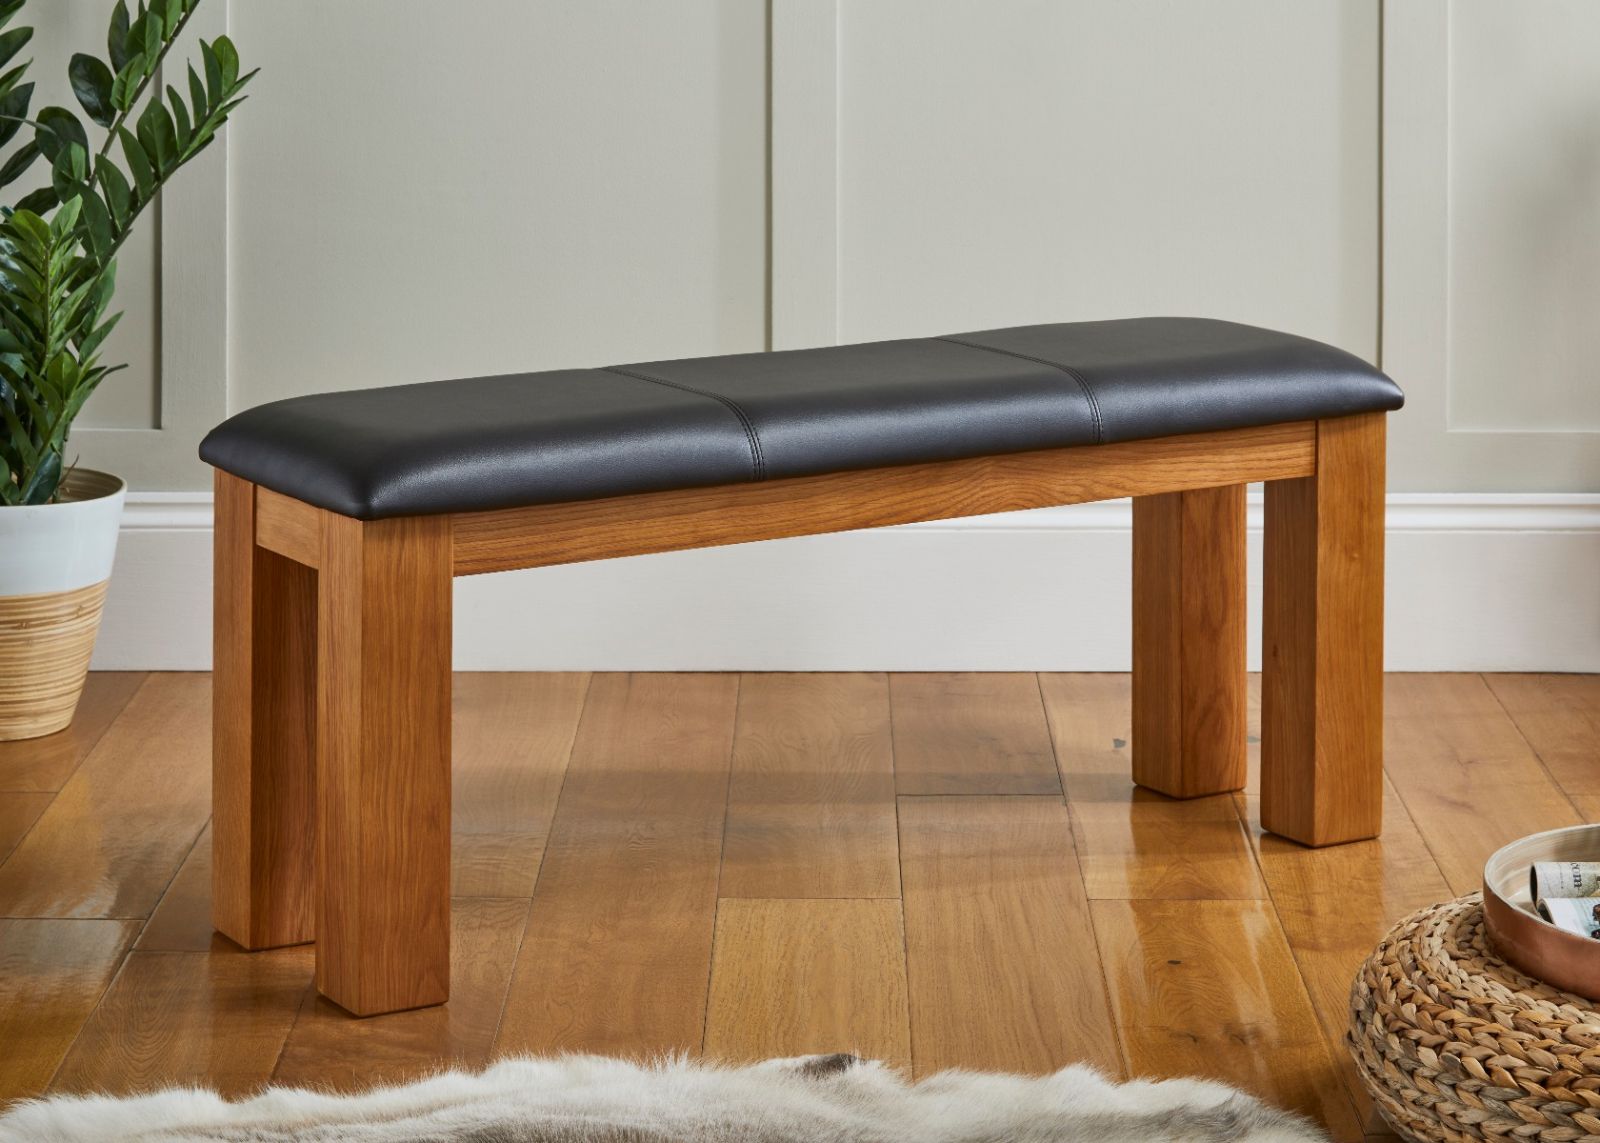 Country Oak 120cm Brown Leather Chunky Oak Bench - 10% OFF WINTER SALE